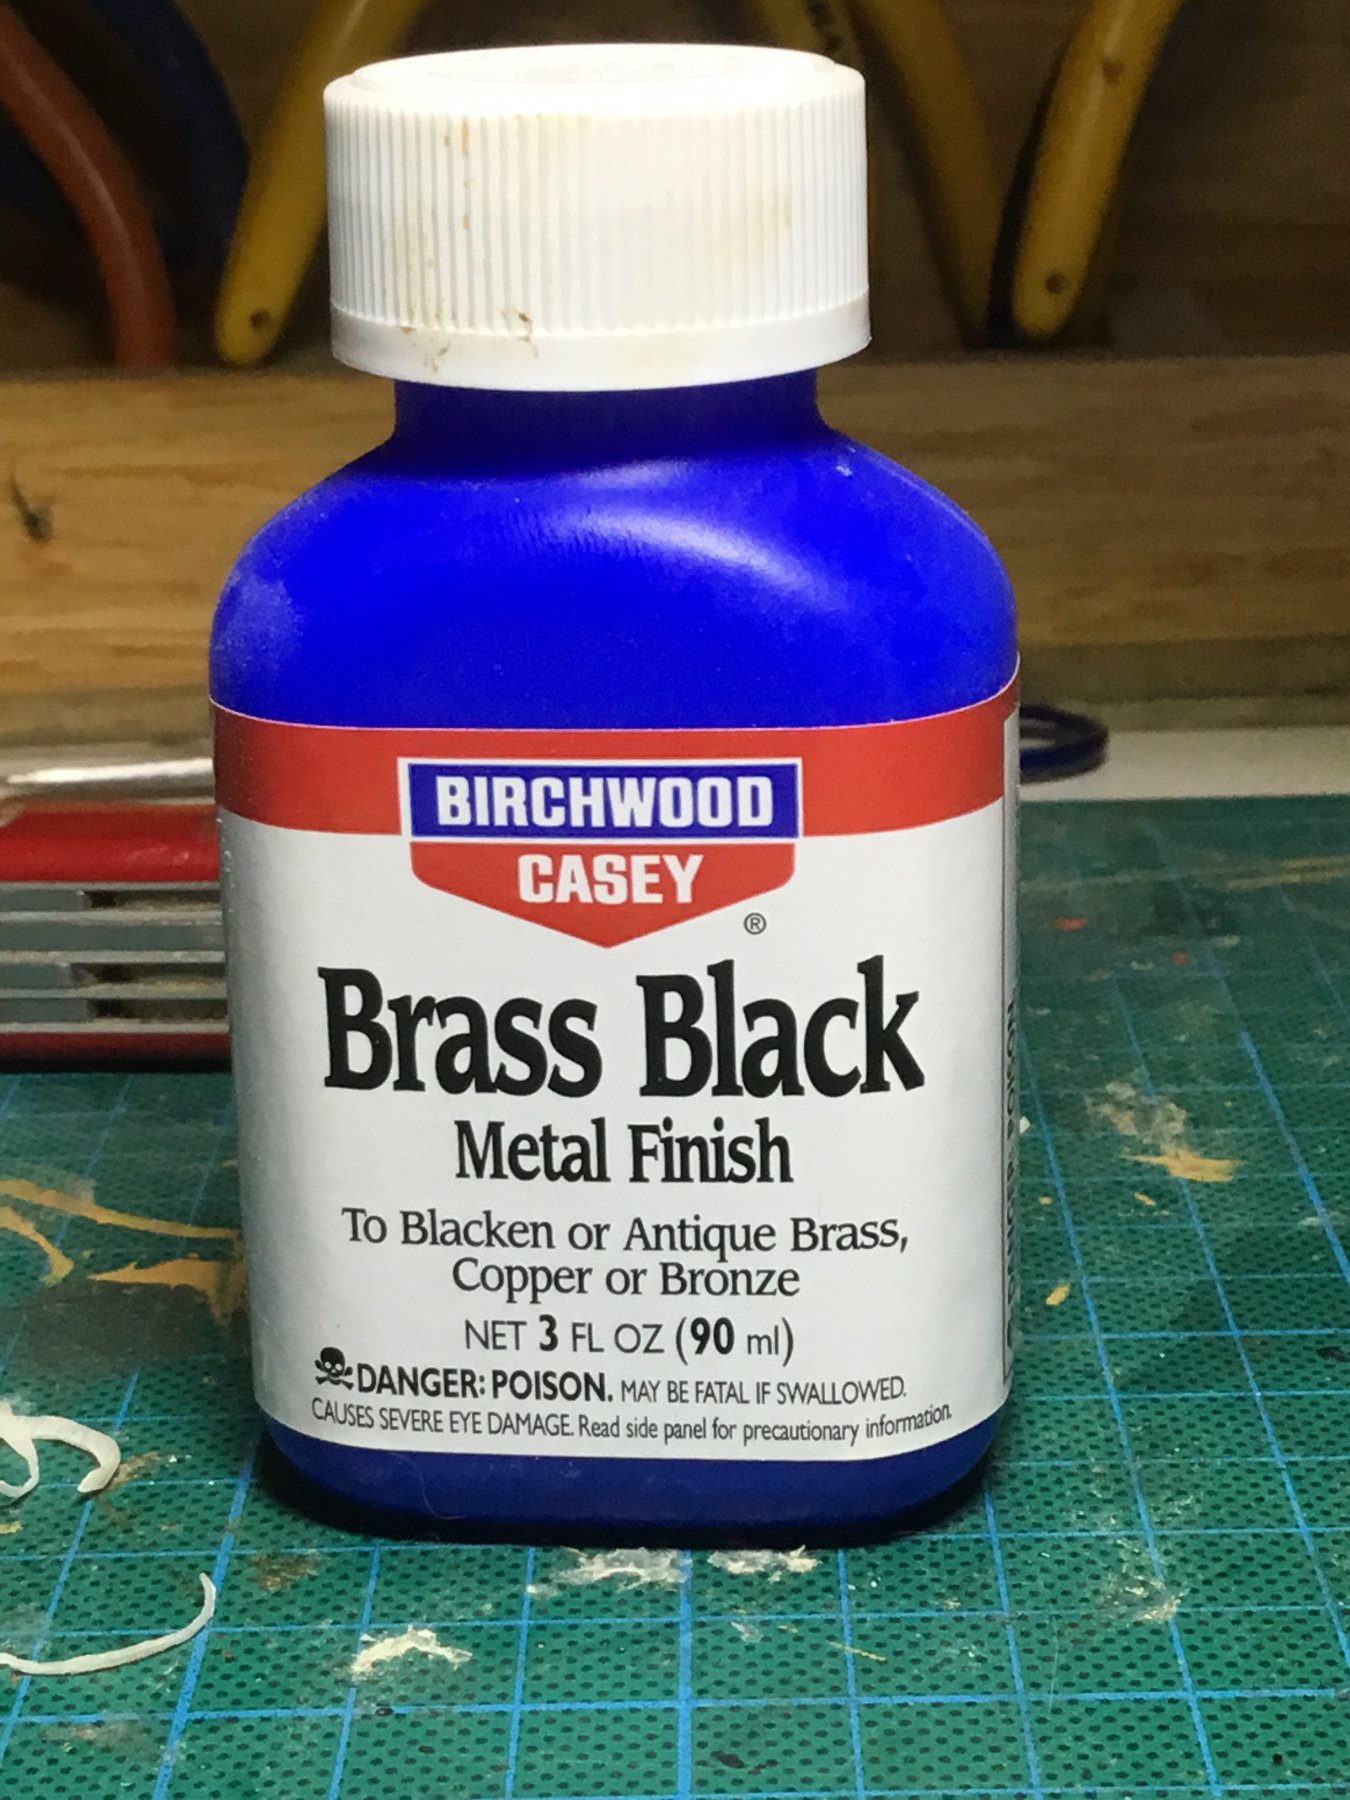 Black wire for eye bolts/rings - Metal Work, Soldering and Metal Fittings -  Model Ship World™